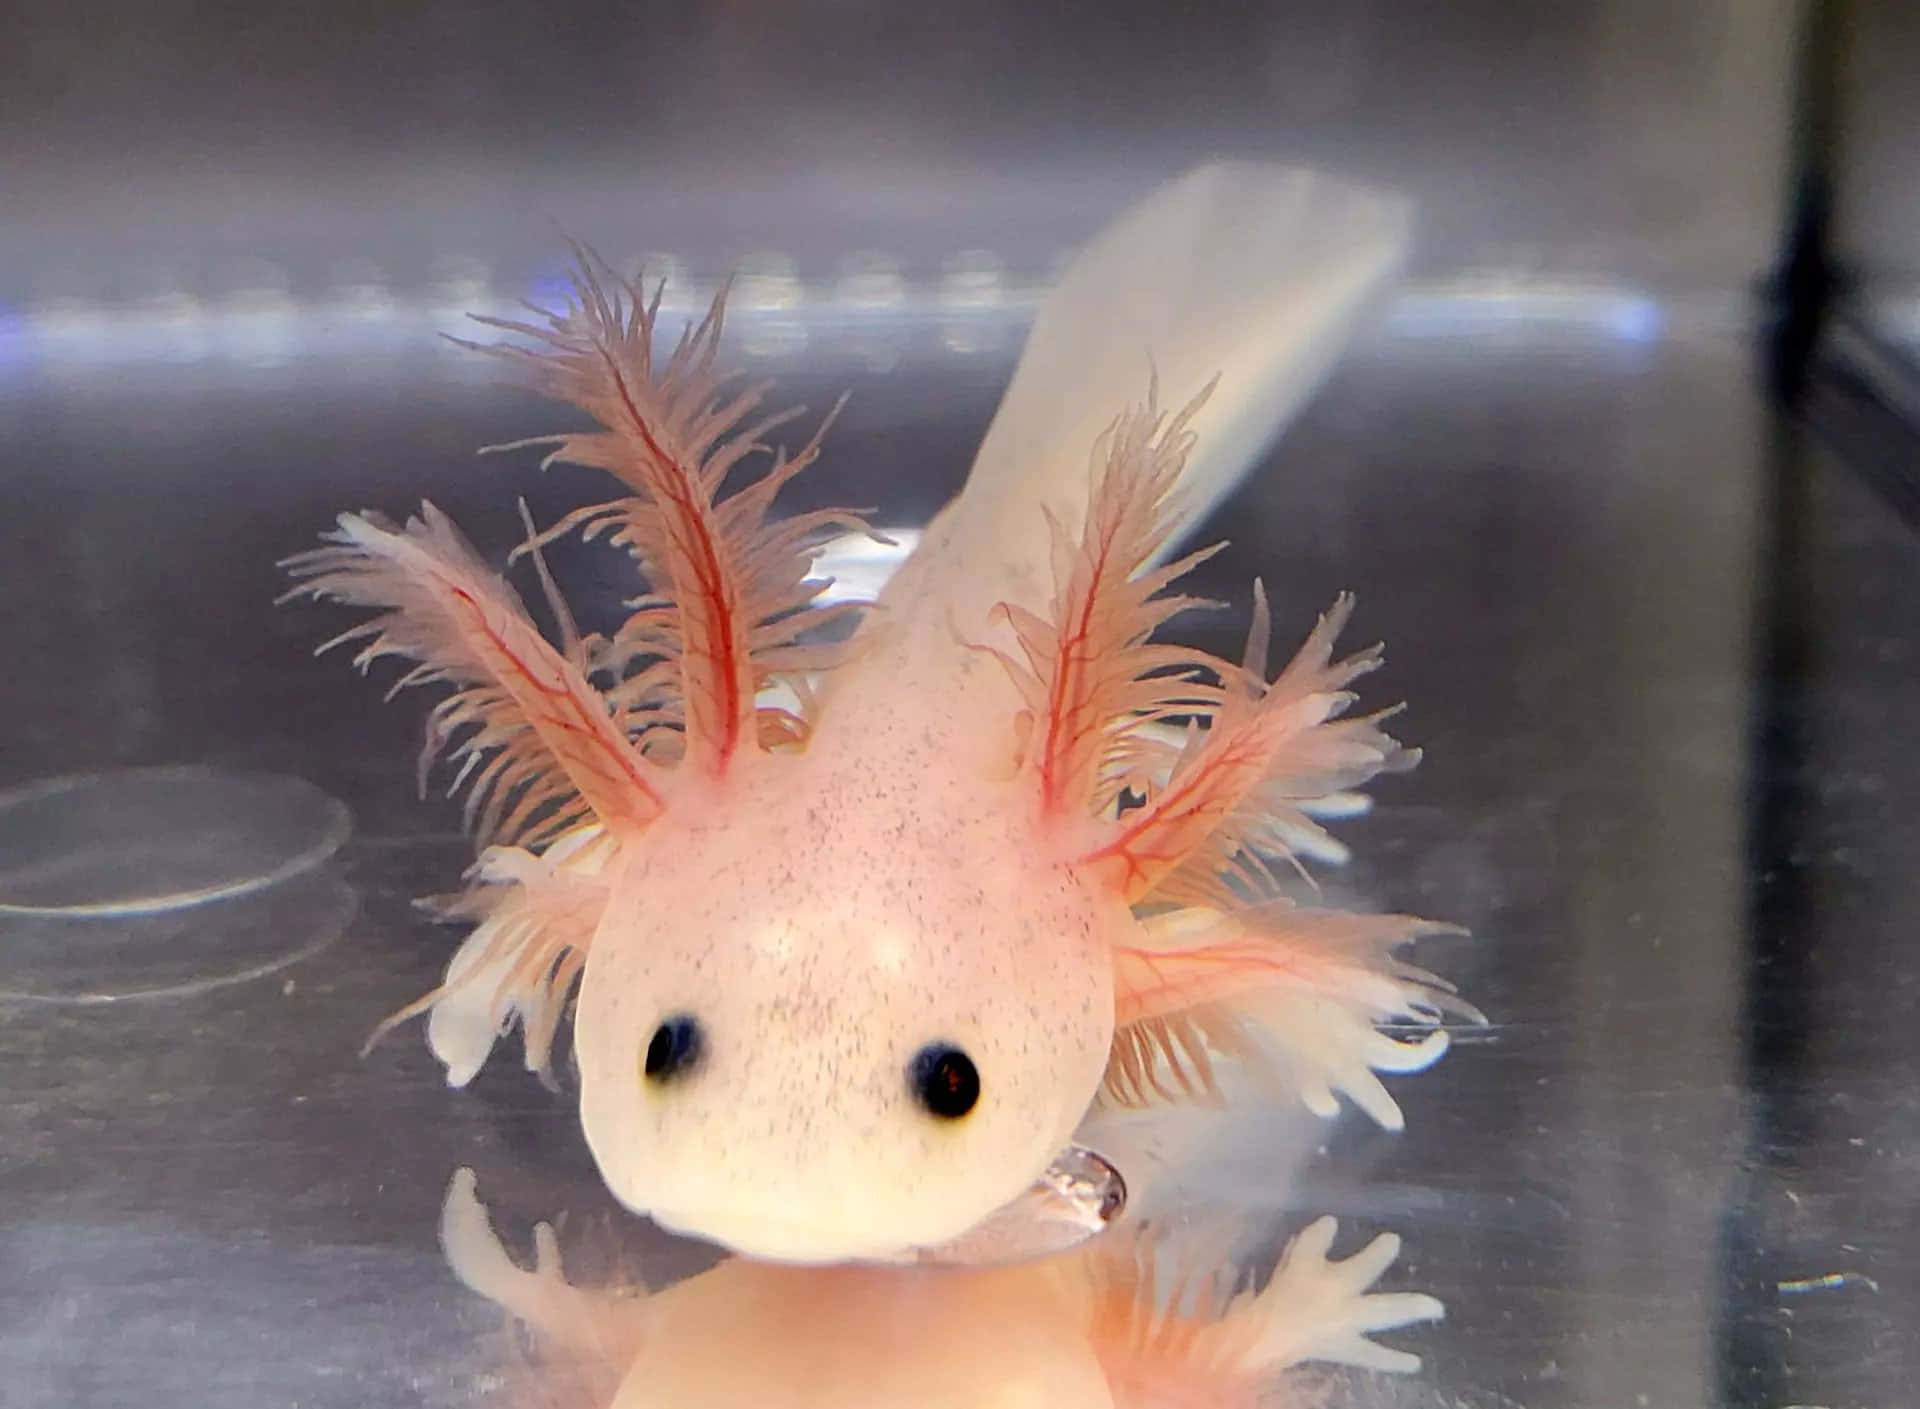 A Small Axolotl With Long Hair And Pink Feathers